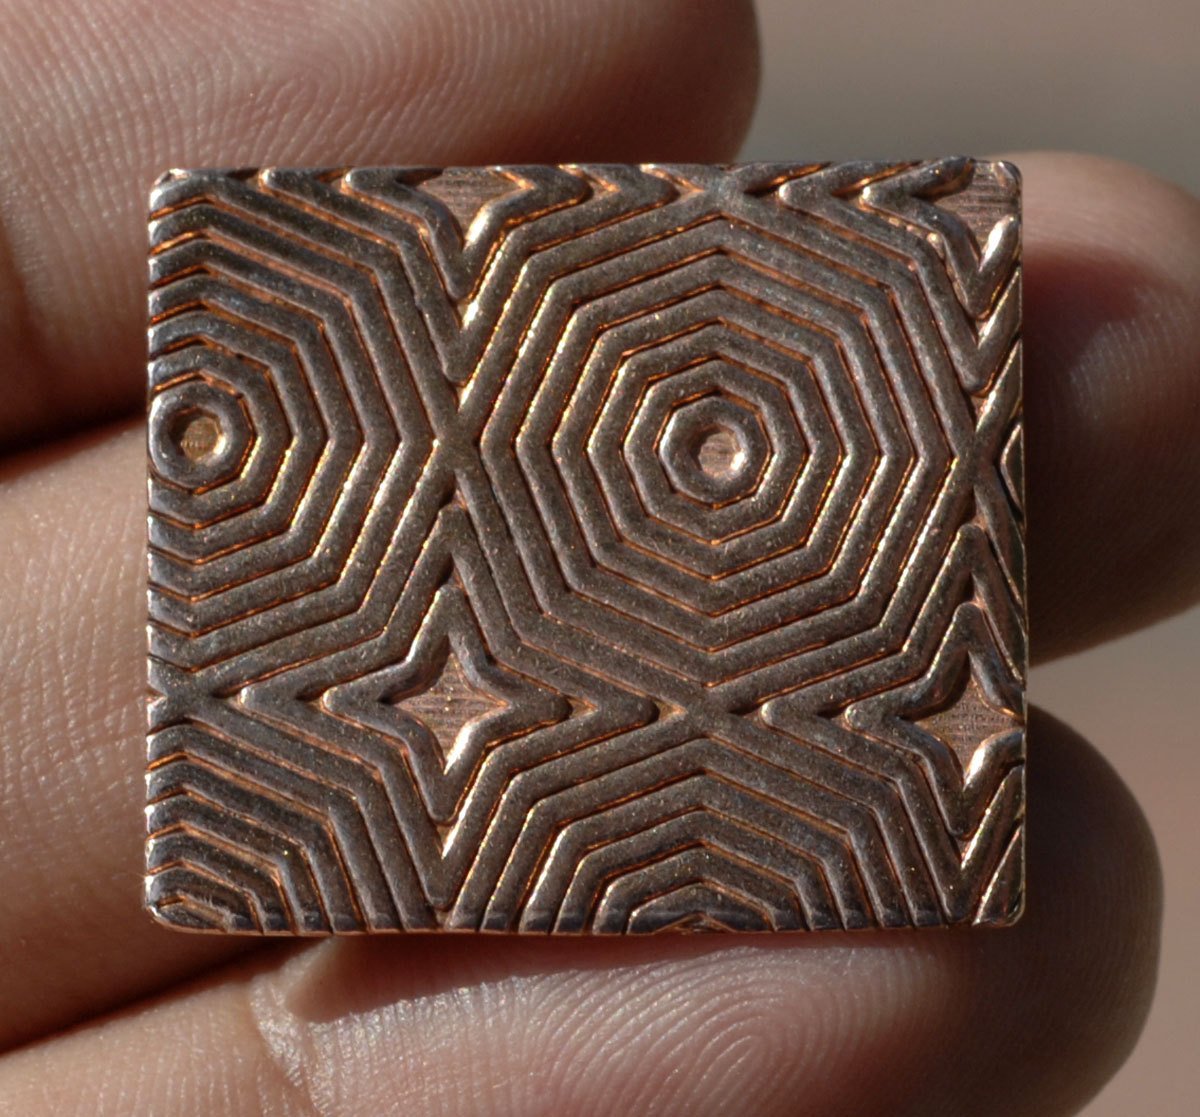 Rectangle 25mm x 22mm in Hexagon Pattern for Enameling Stamping Texturing - Variety of Metals